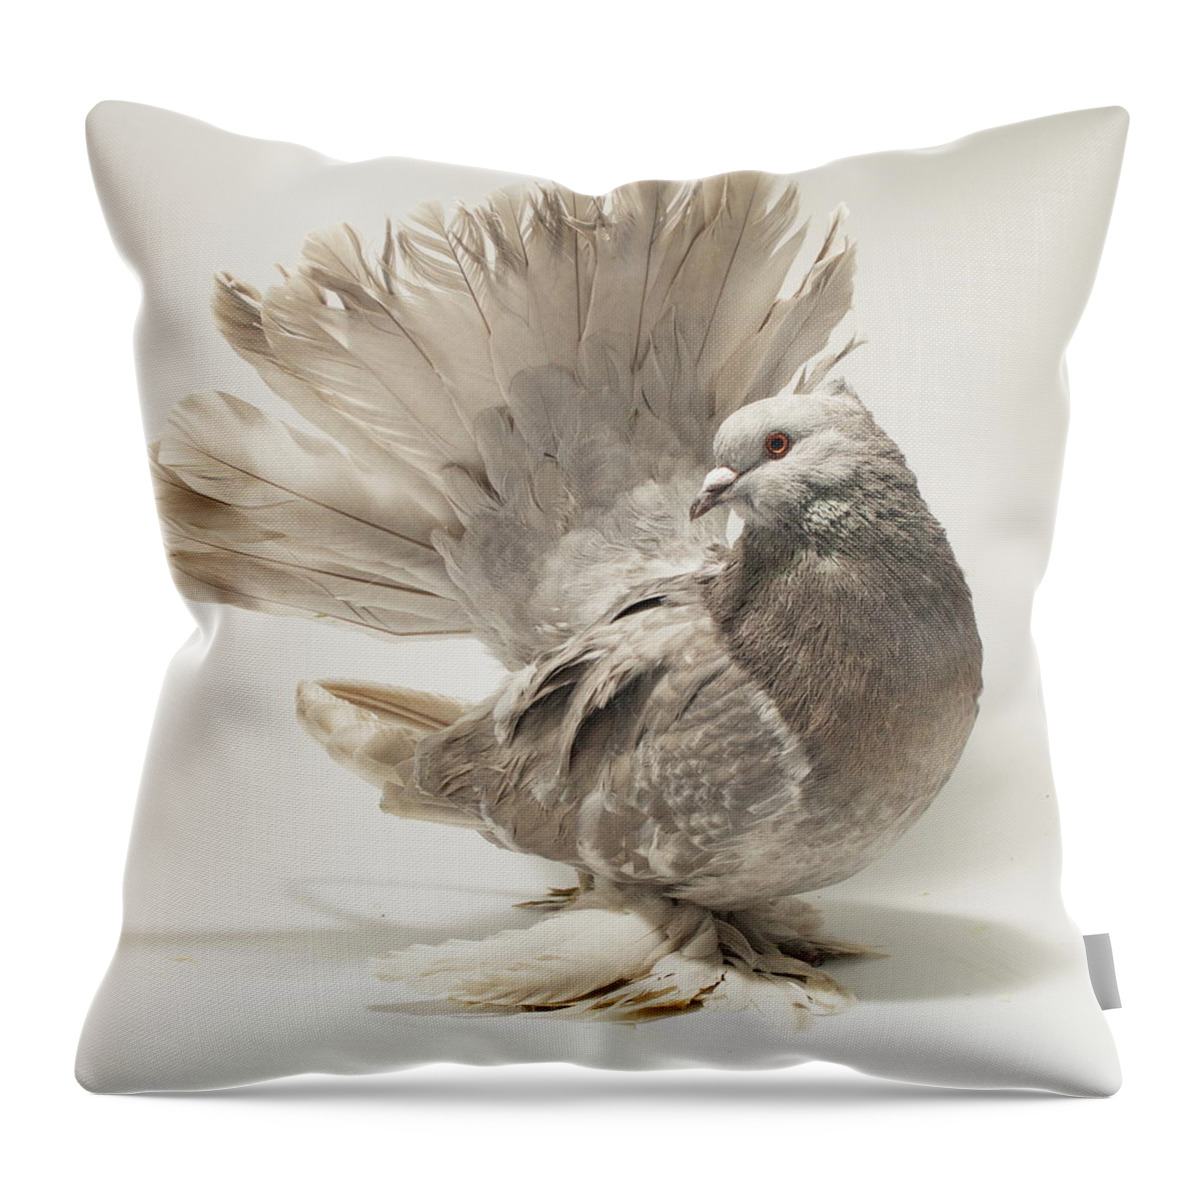 Bird Throw Pillow featuring the photograph Indian Fantail Pigeon #3 by Nathan Abbott